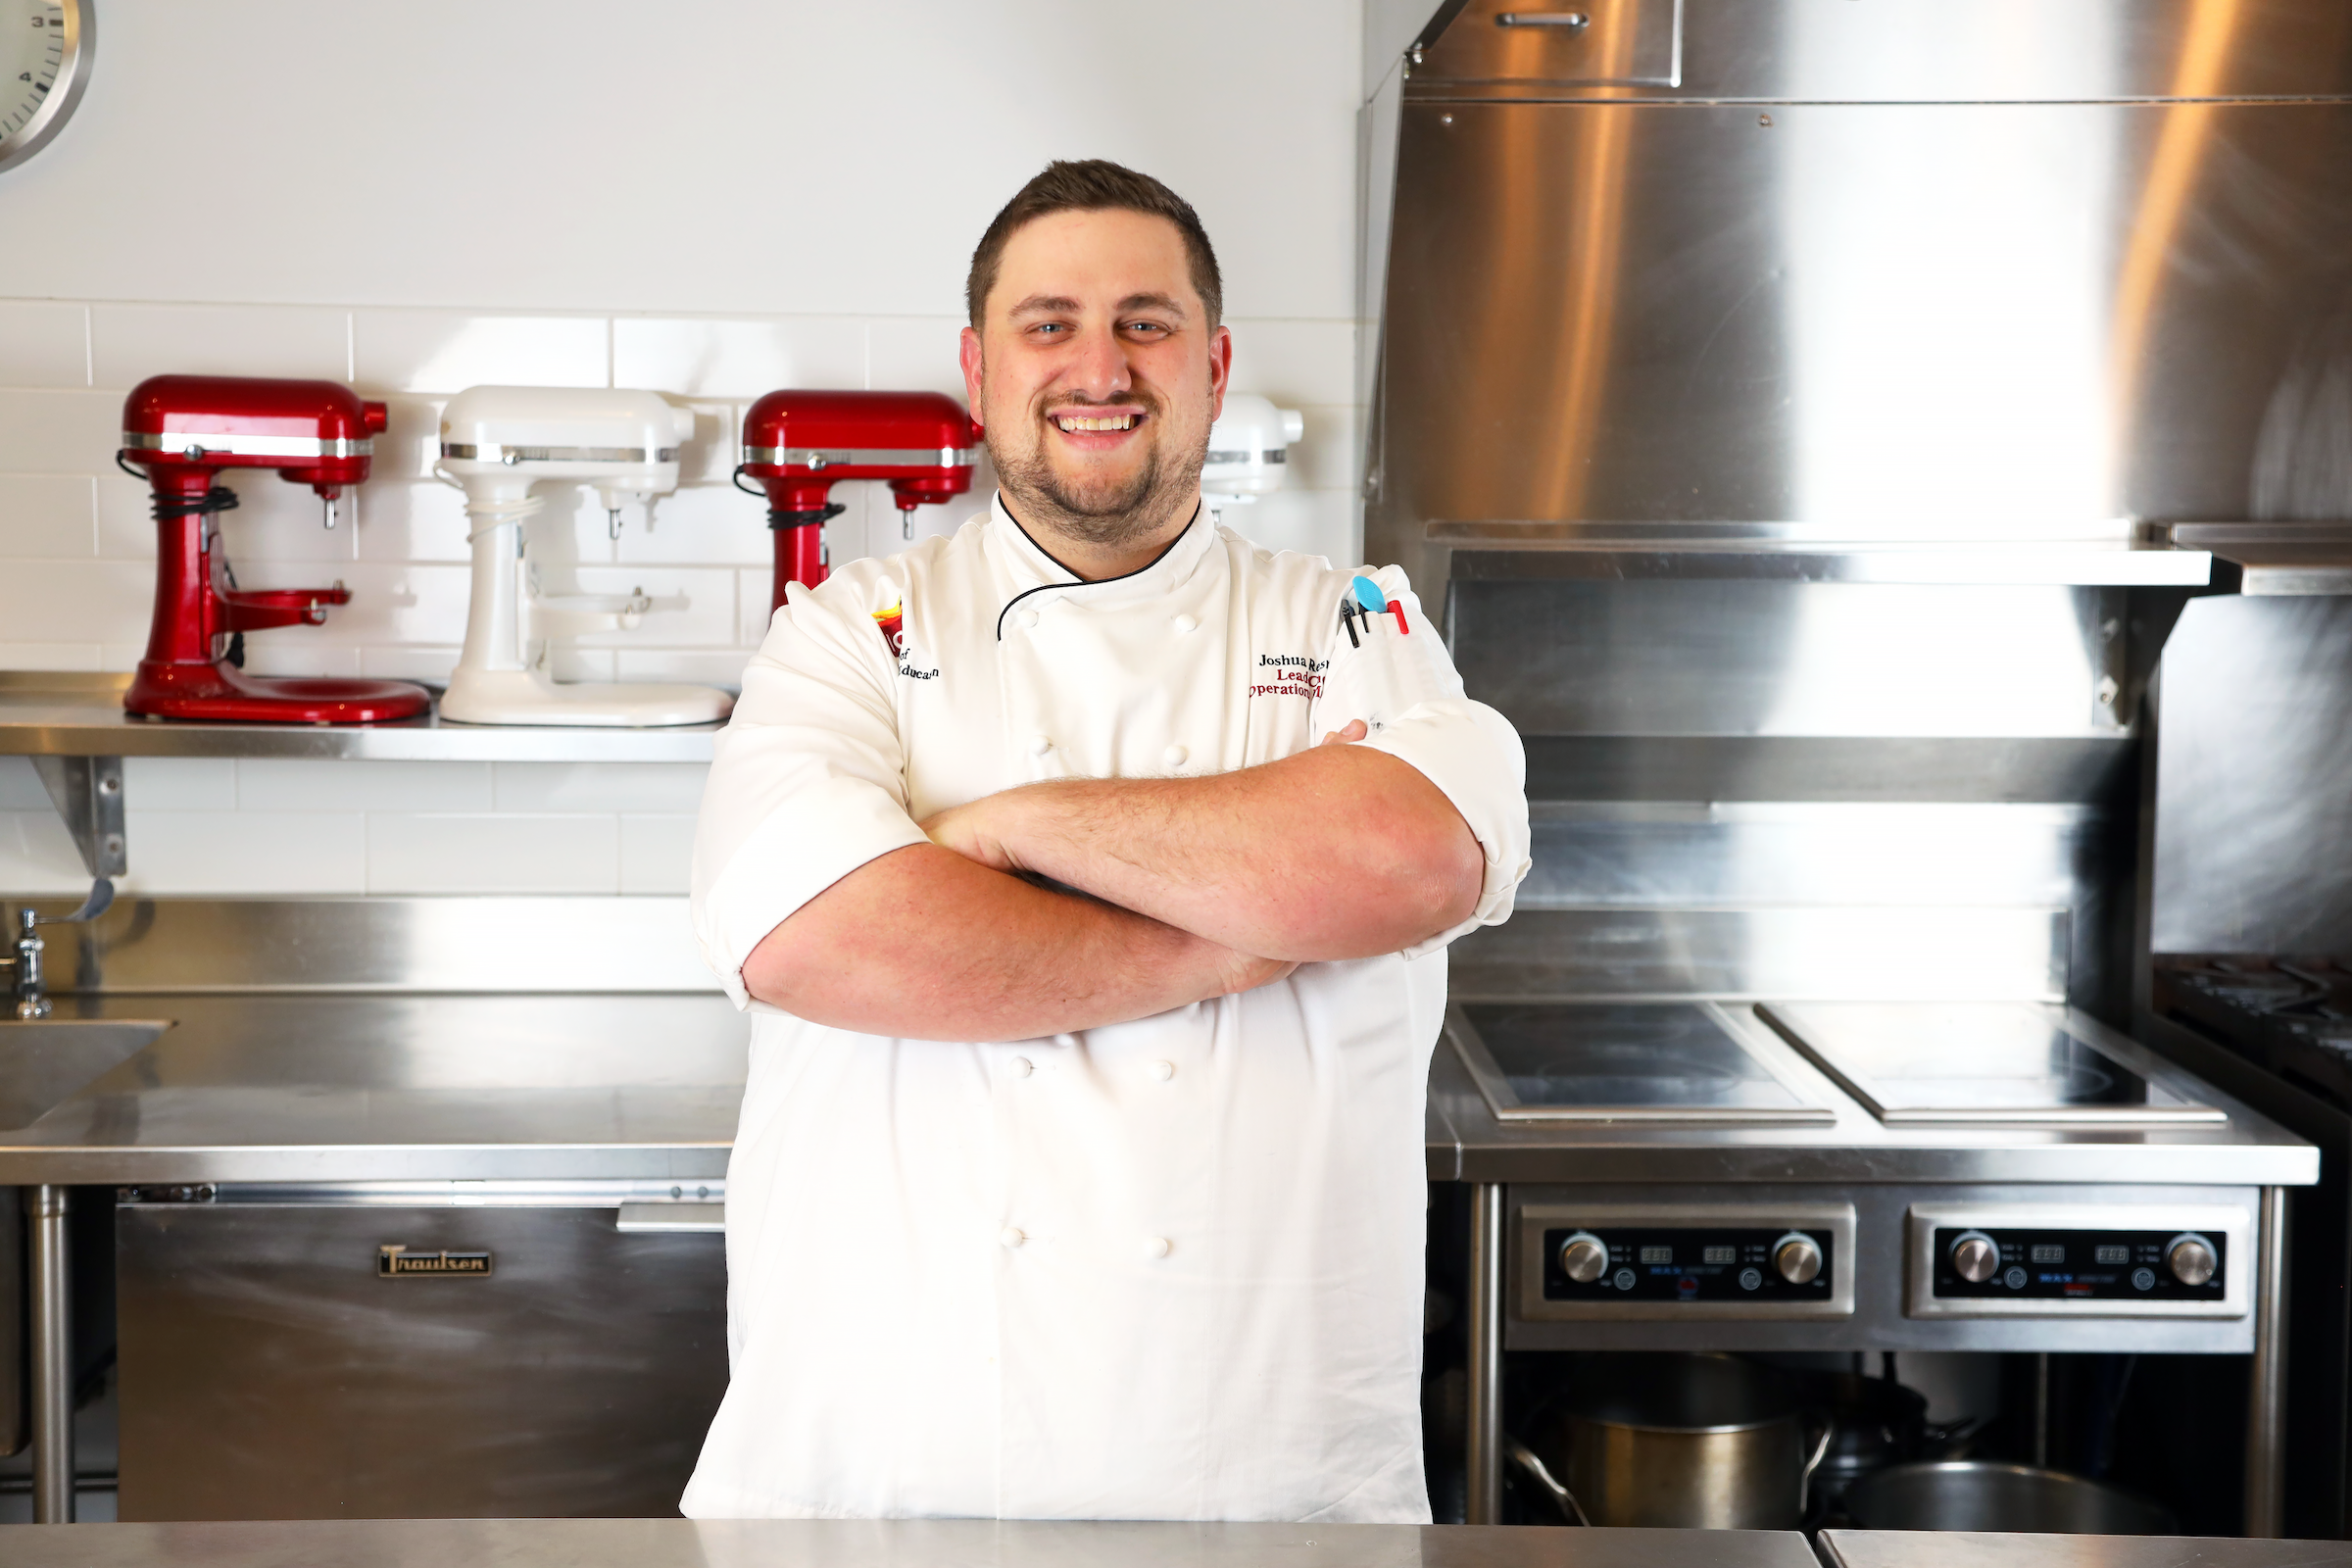 Chef-Instructor Joshua Resnick stands in a kitchen smiling